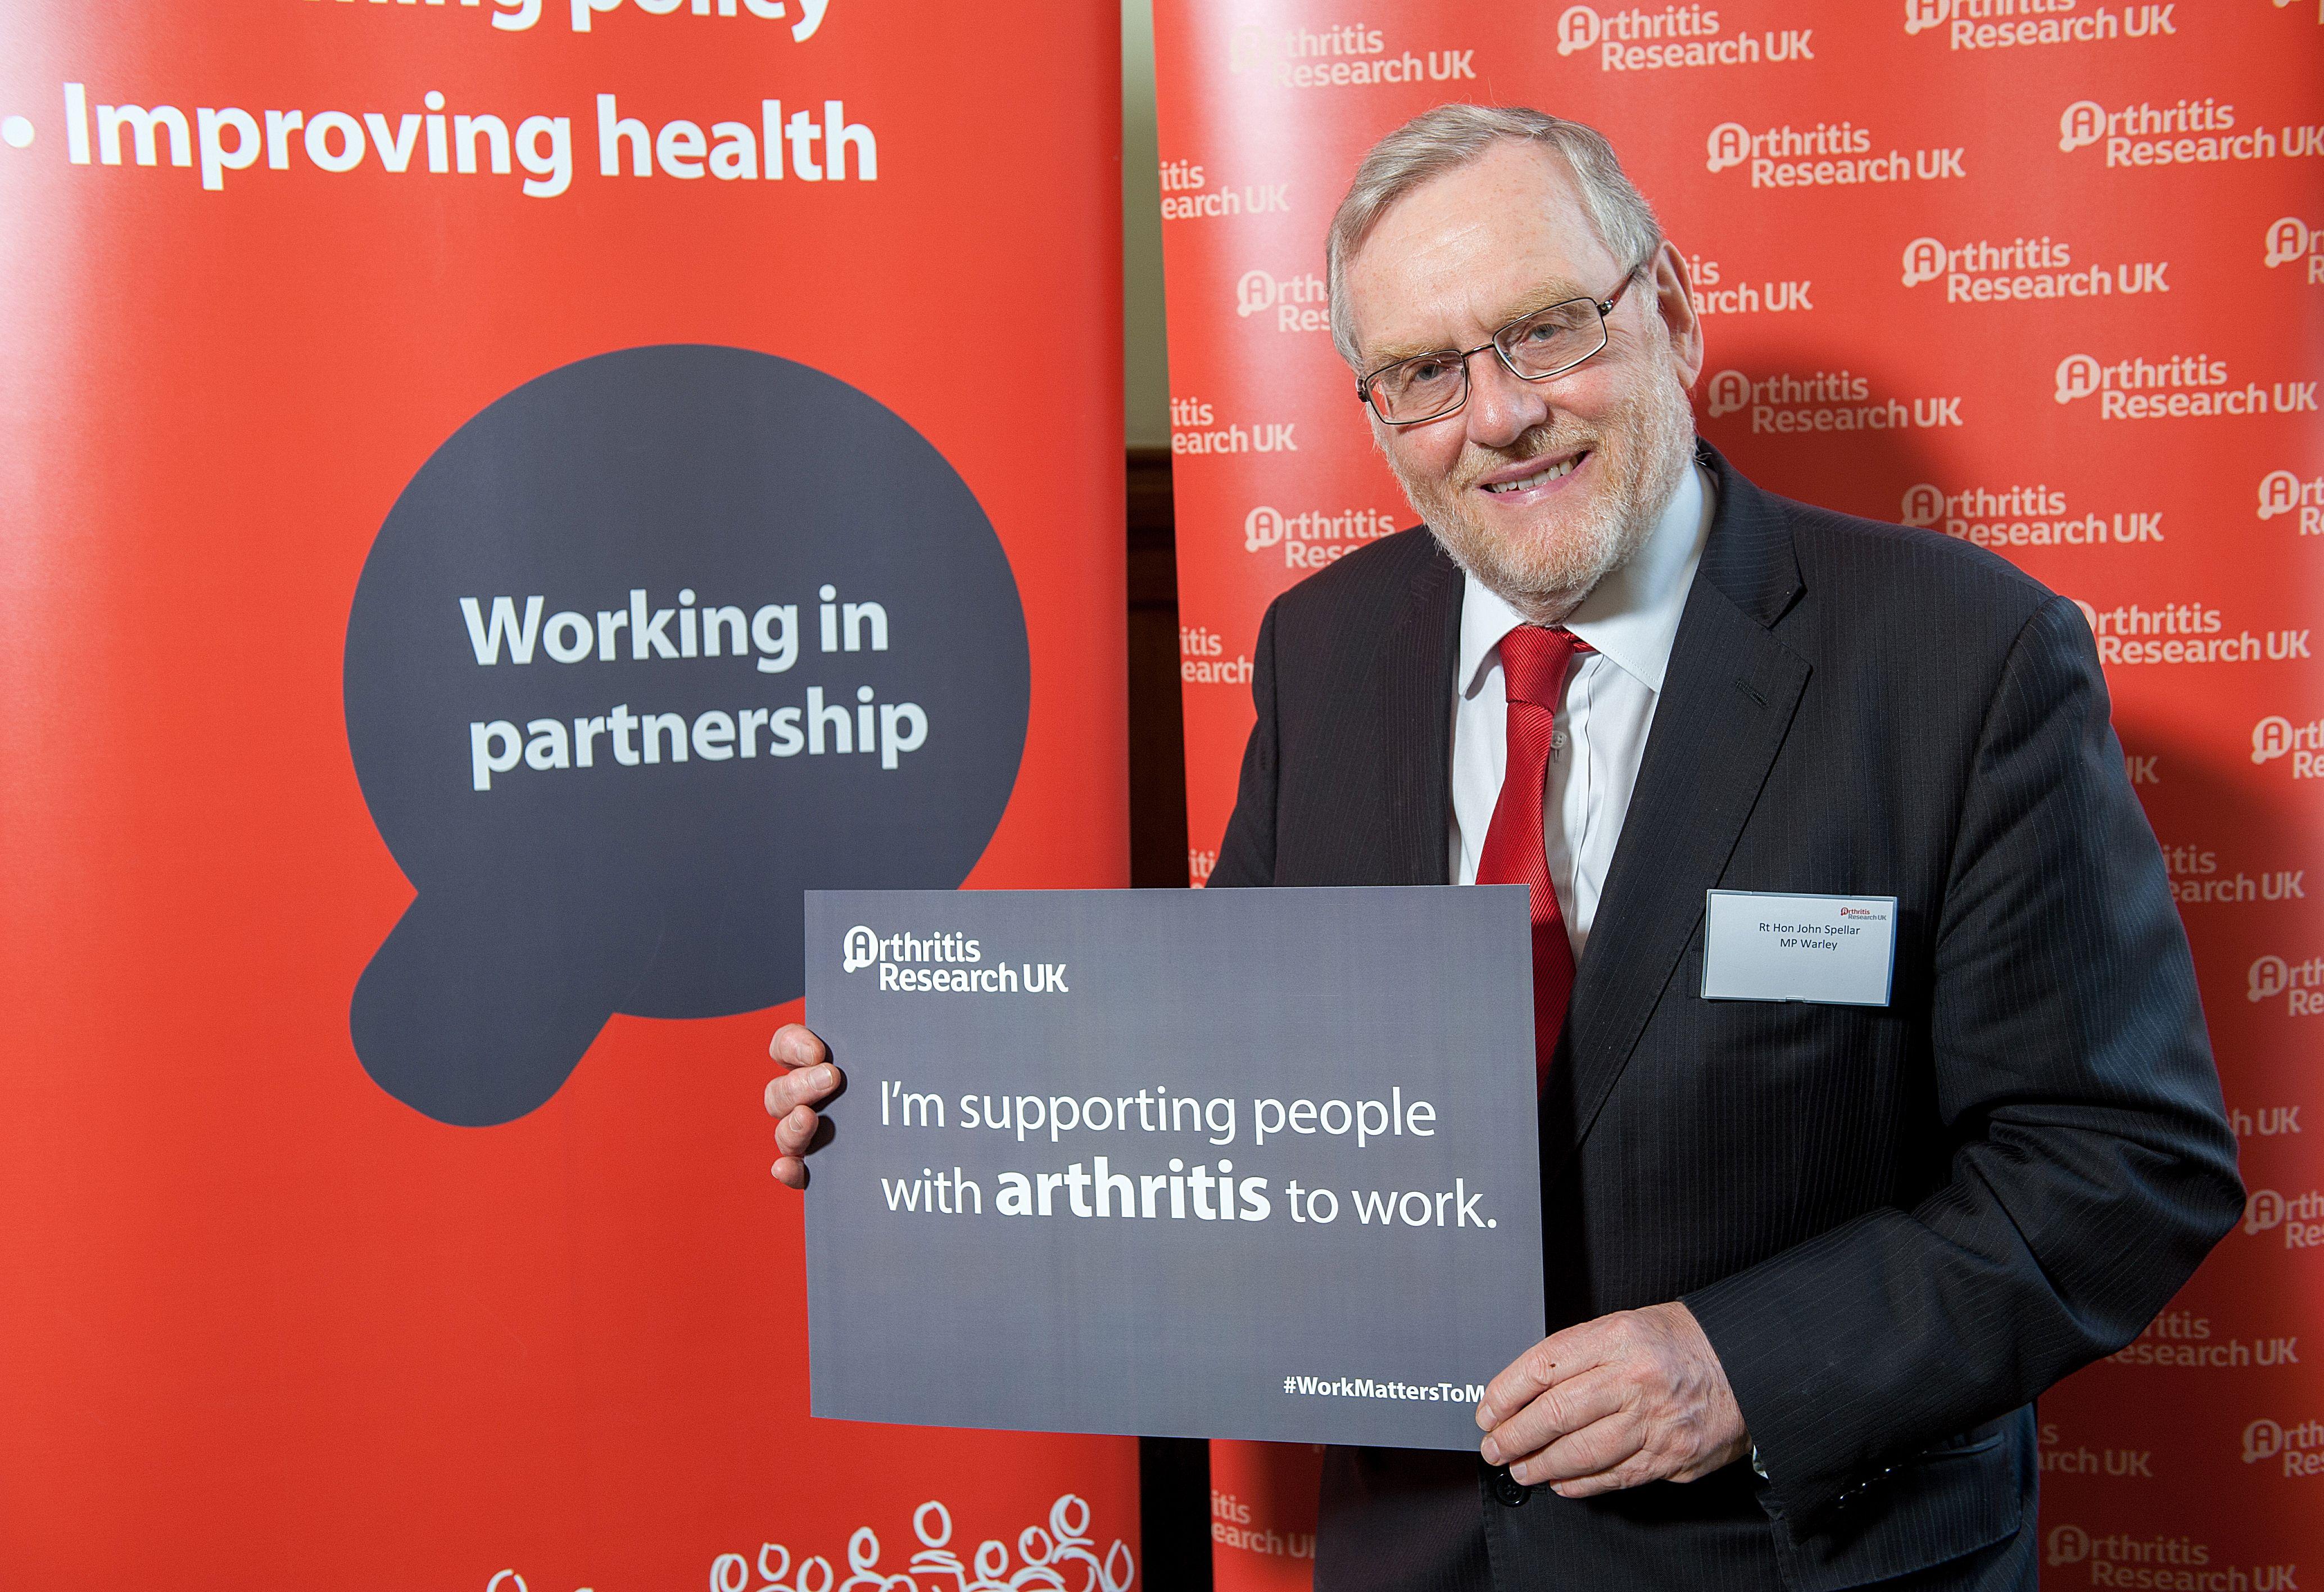 Red MP Arch Logo - 50,662 in Sandwell living with back pain, says John Spellar MP ...